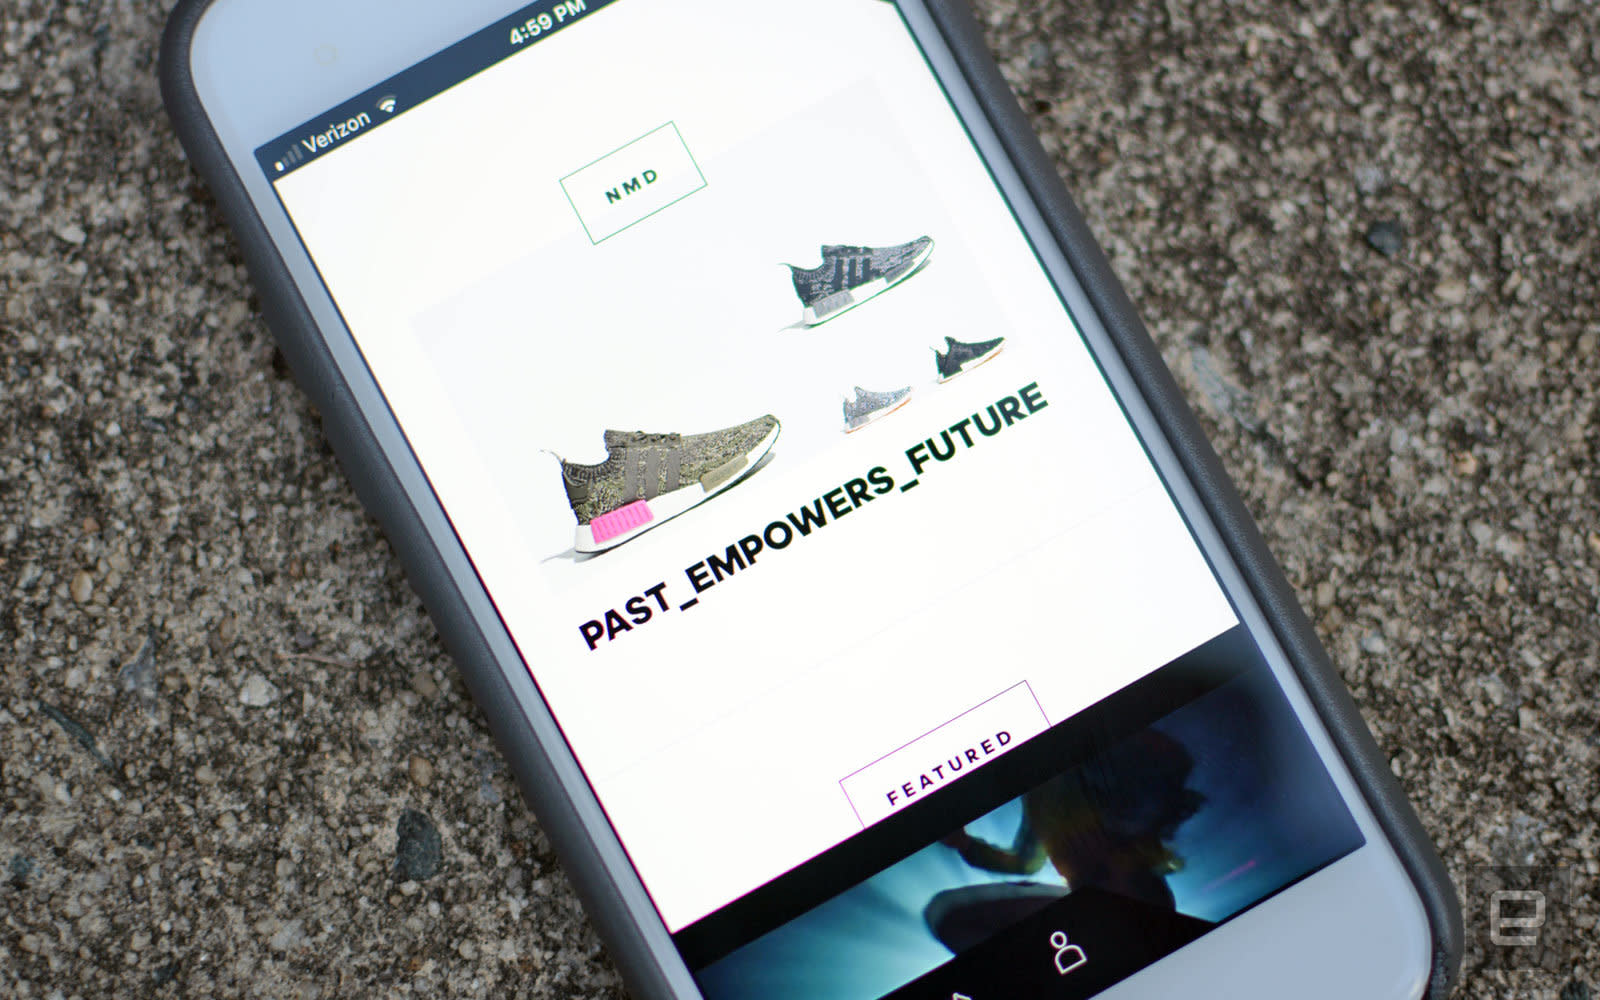 can you buy yeezys on the adidas app